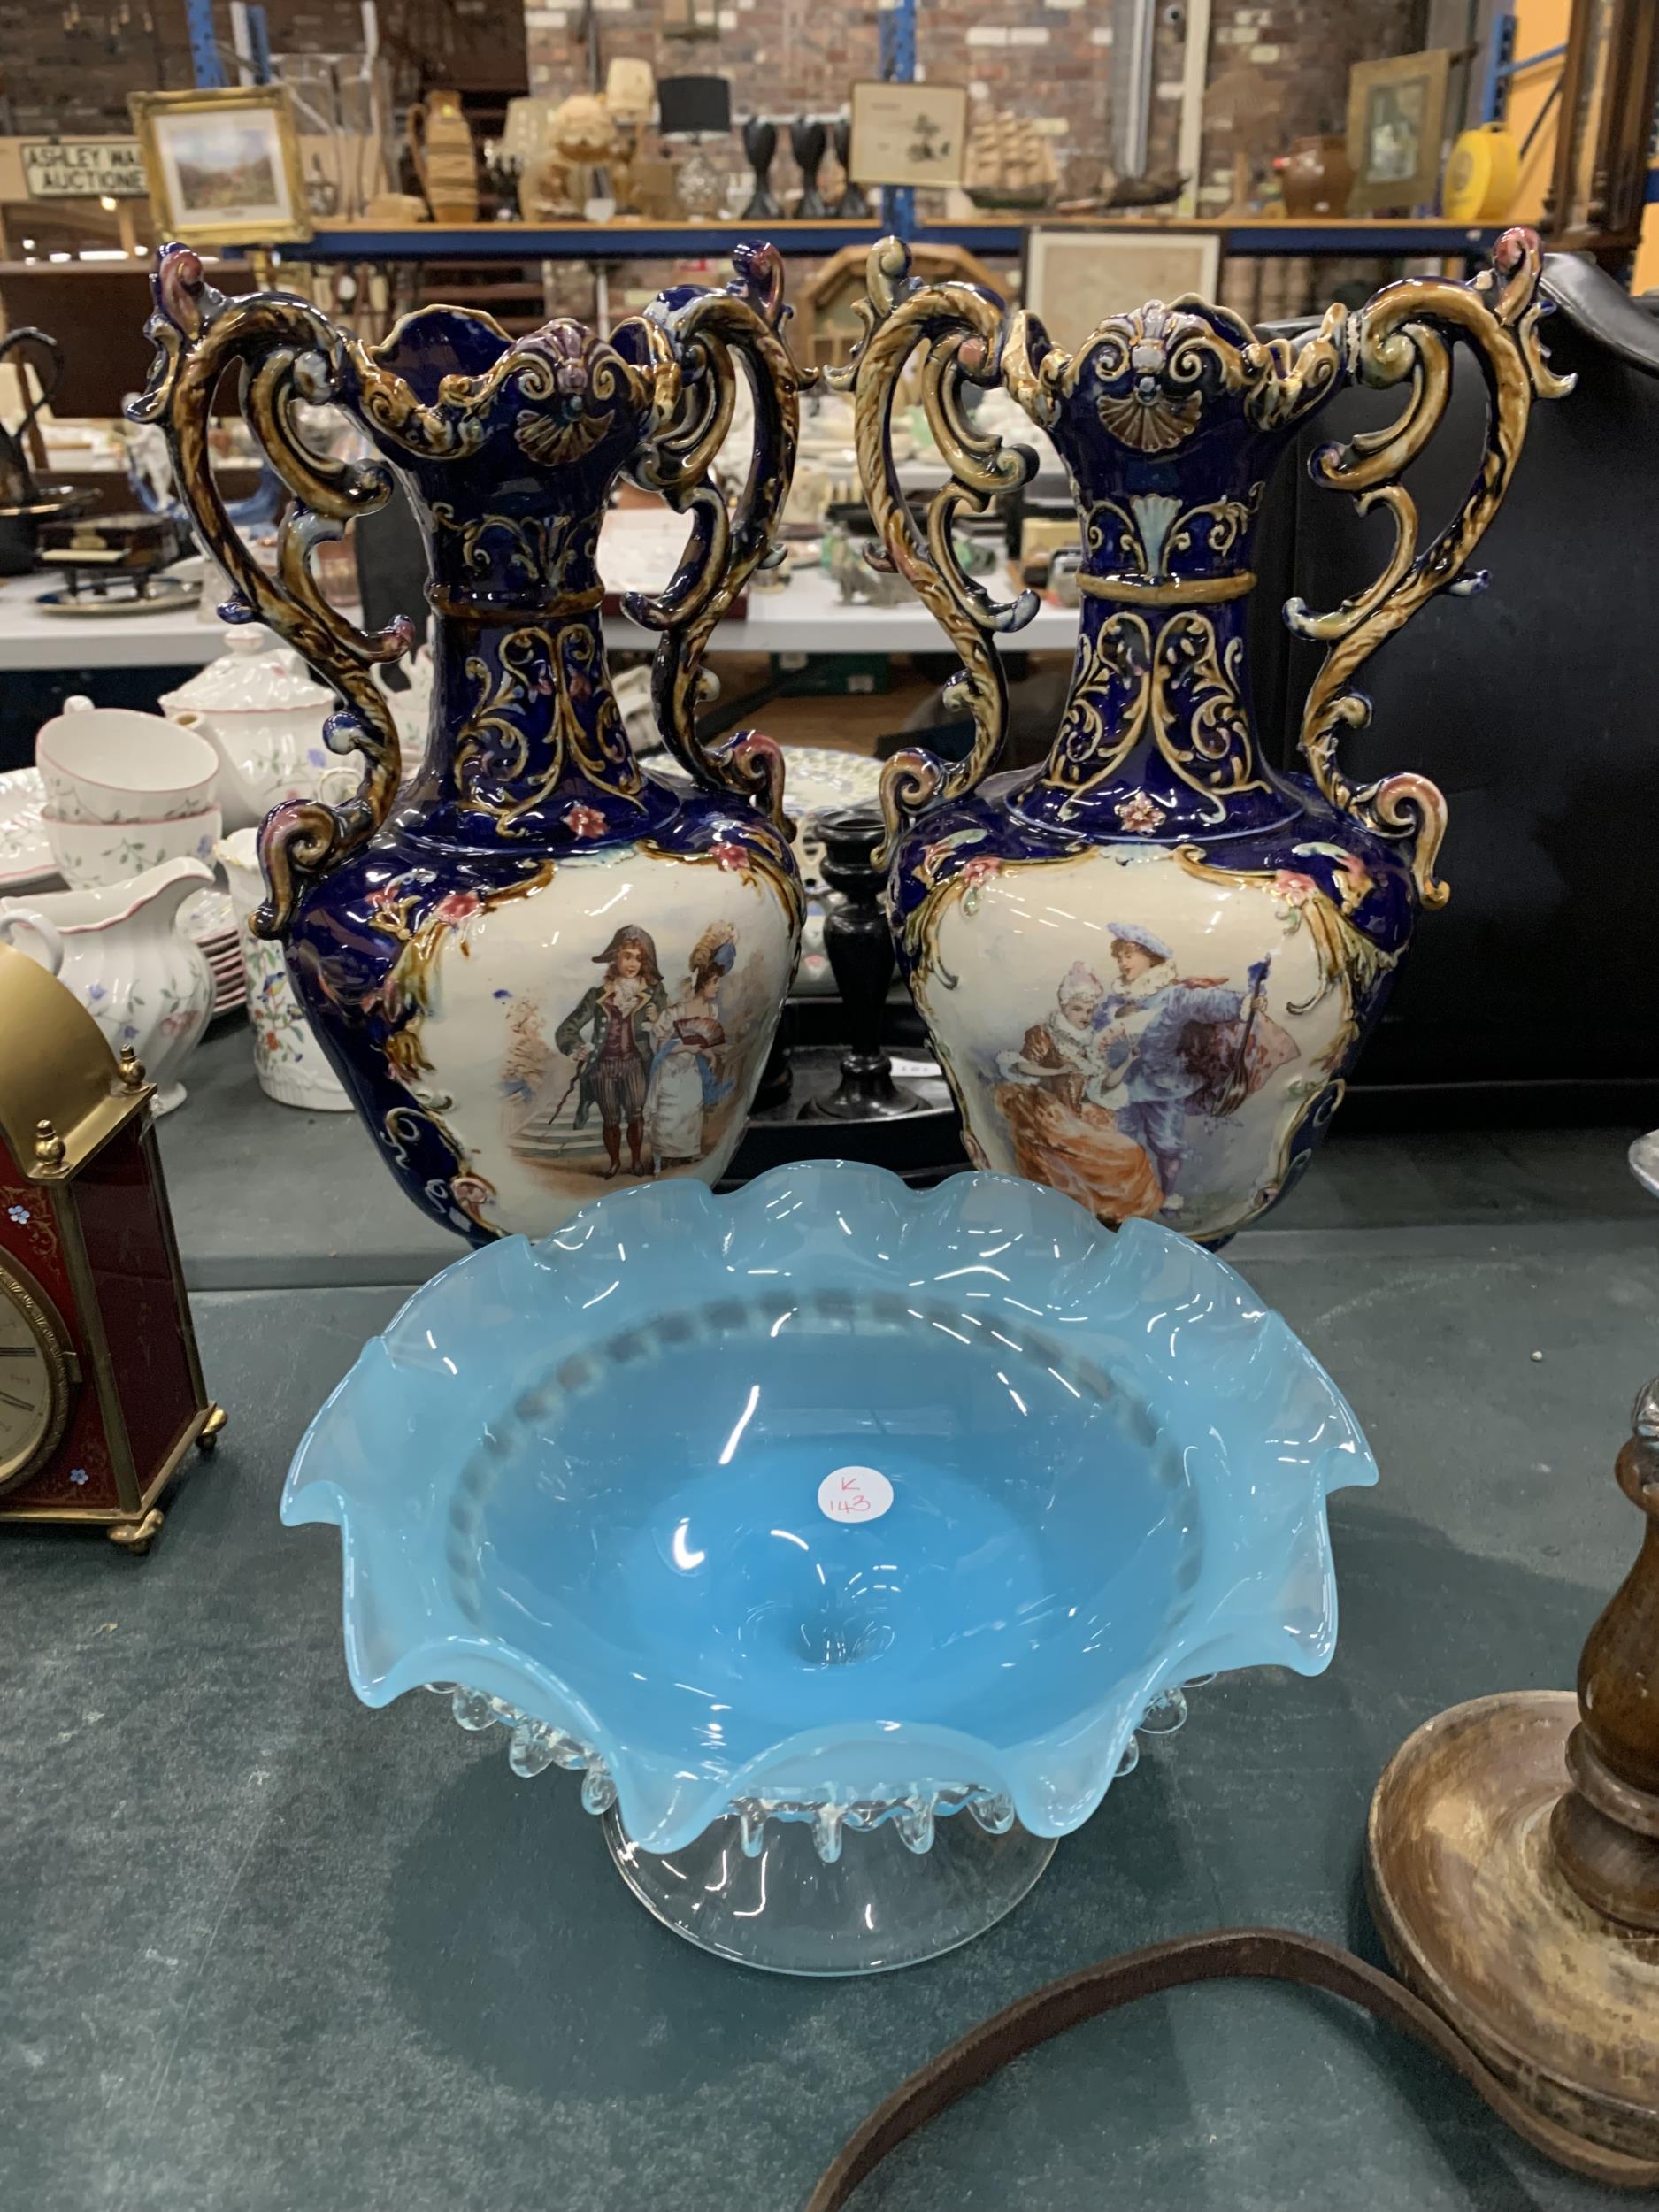 A PAIR OF VICTORIAN VASES IN COBALT BLUE WITH TRANSFER PRINT PATTERN PLUS A PALE BLUE GLASS FOOTED